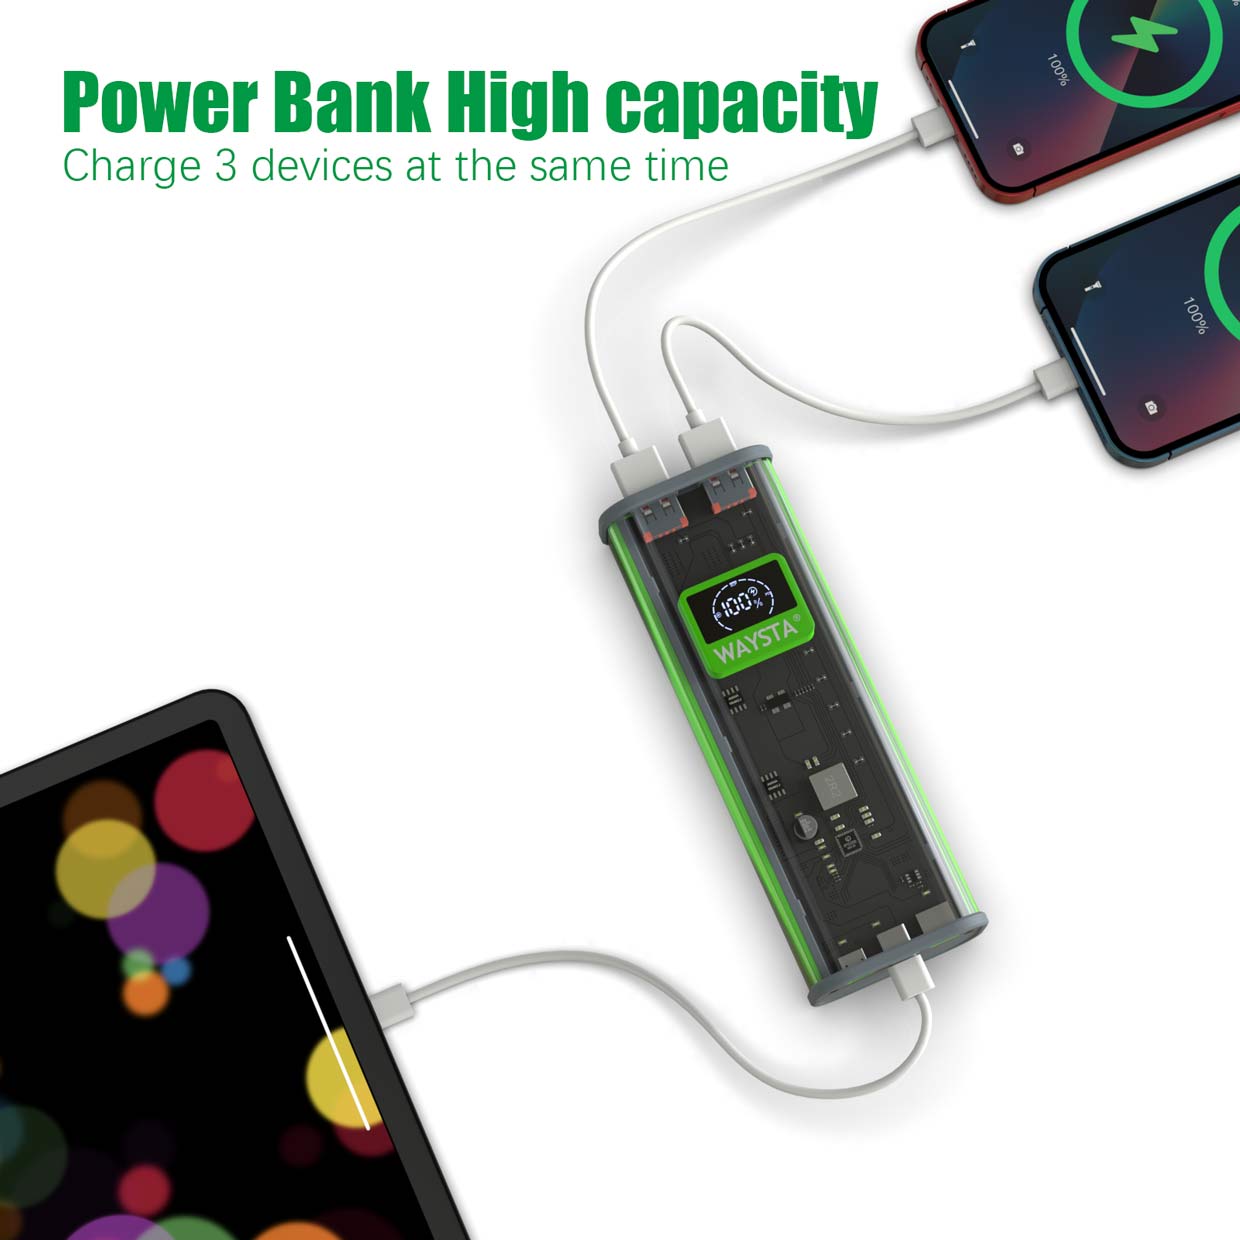 Power Bank 26800mAh, portable charger, QC 3.0 22.5W and PD 20W fast charging battery pack, digital smart display compatible with mobile phones cameras tablets etc.